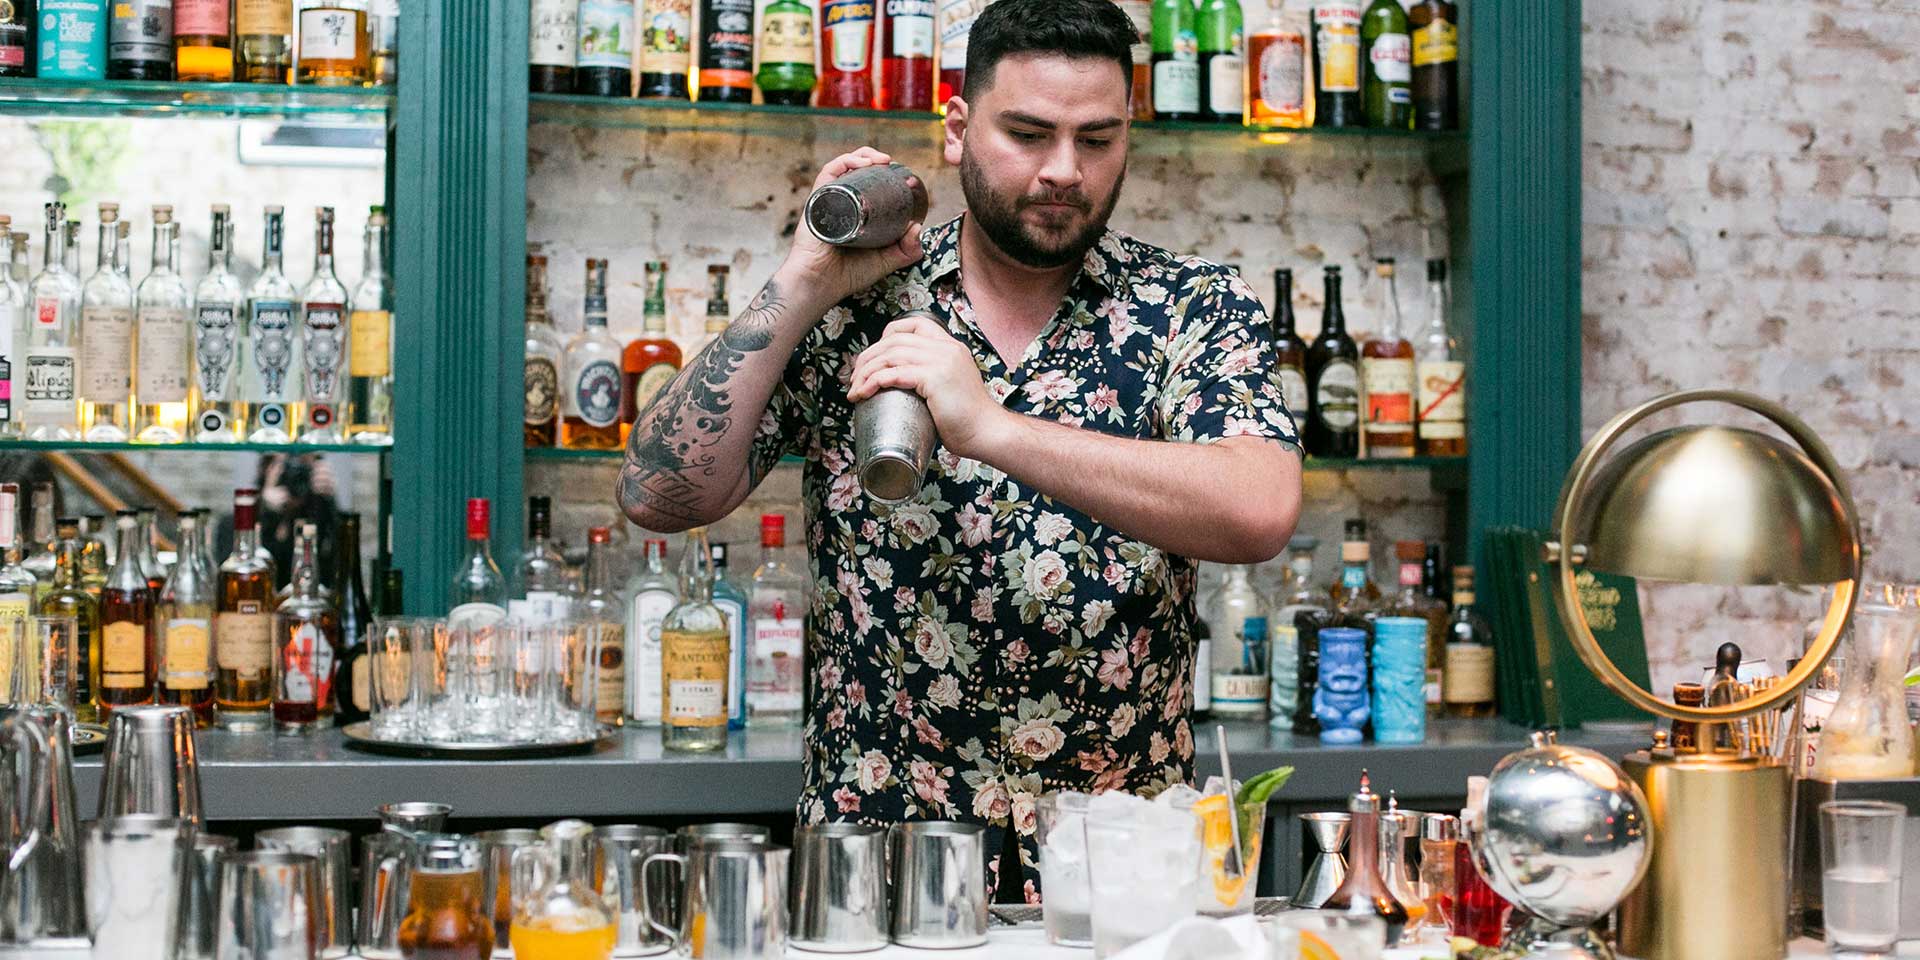 What to Drink in Tampa? 5 Local Bartenders Dish on Their Go-To Cocktails